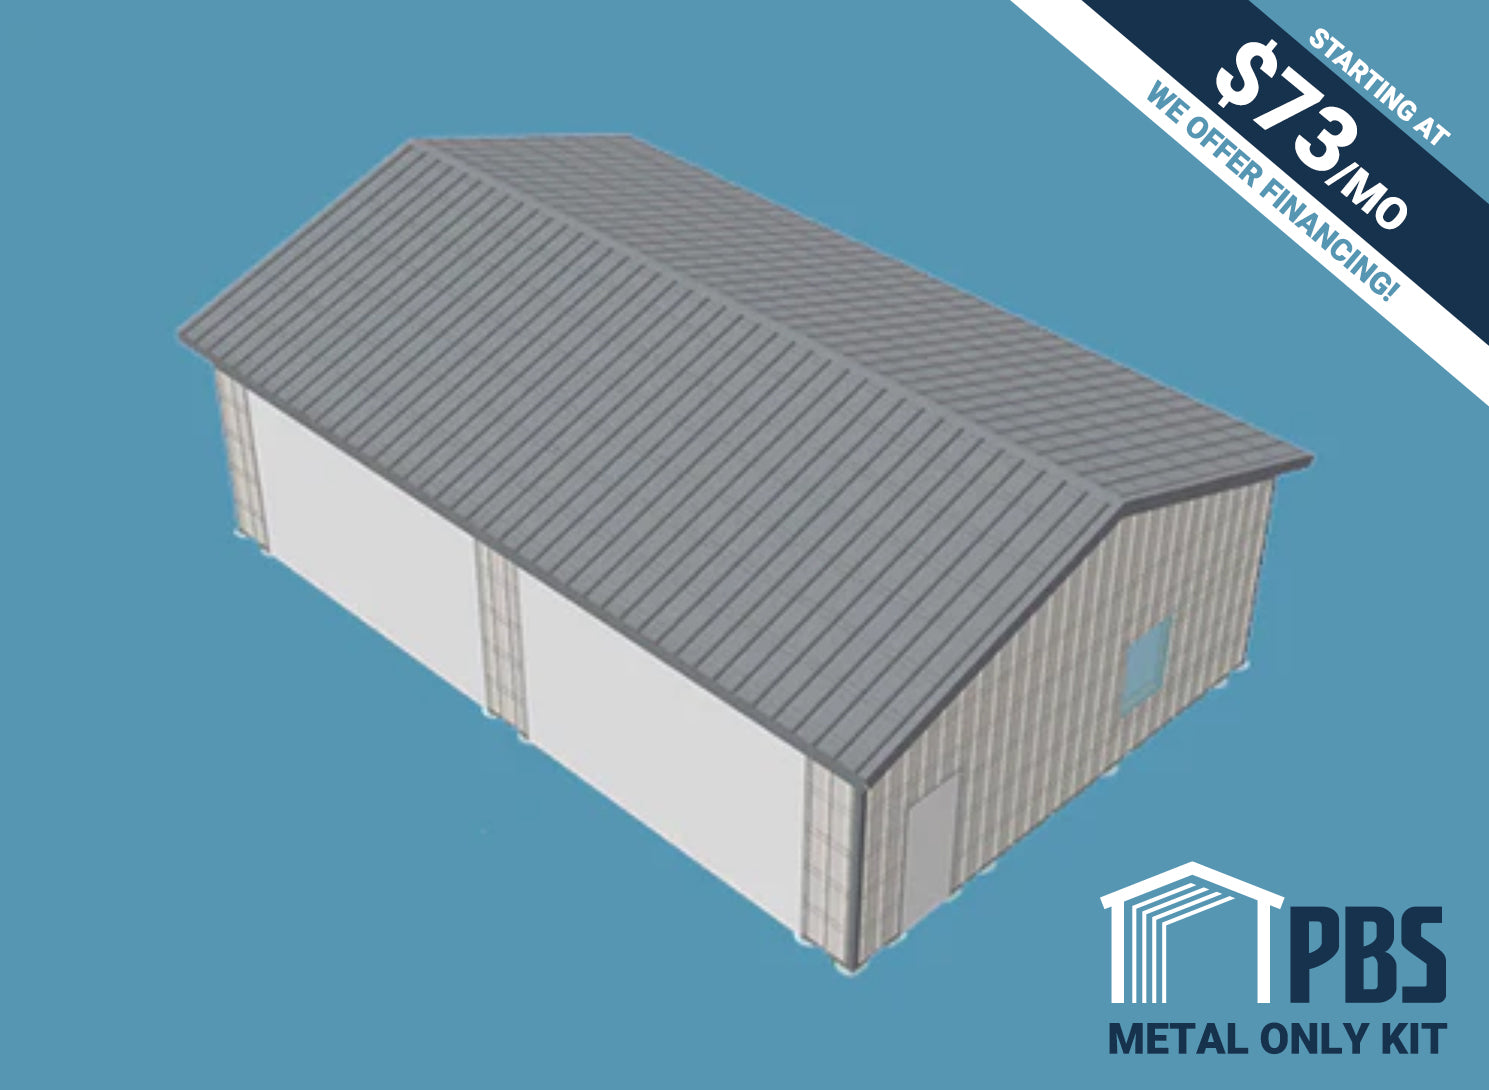 Pole Building Exterior Kit - 26x40x11 (METAL ONLY)